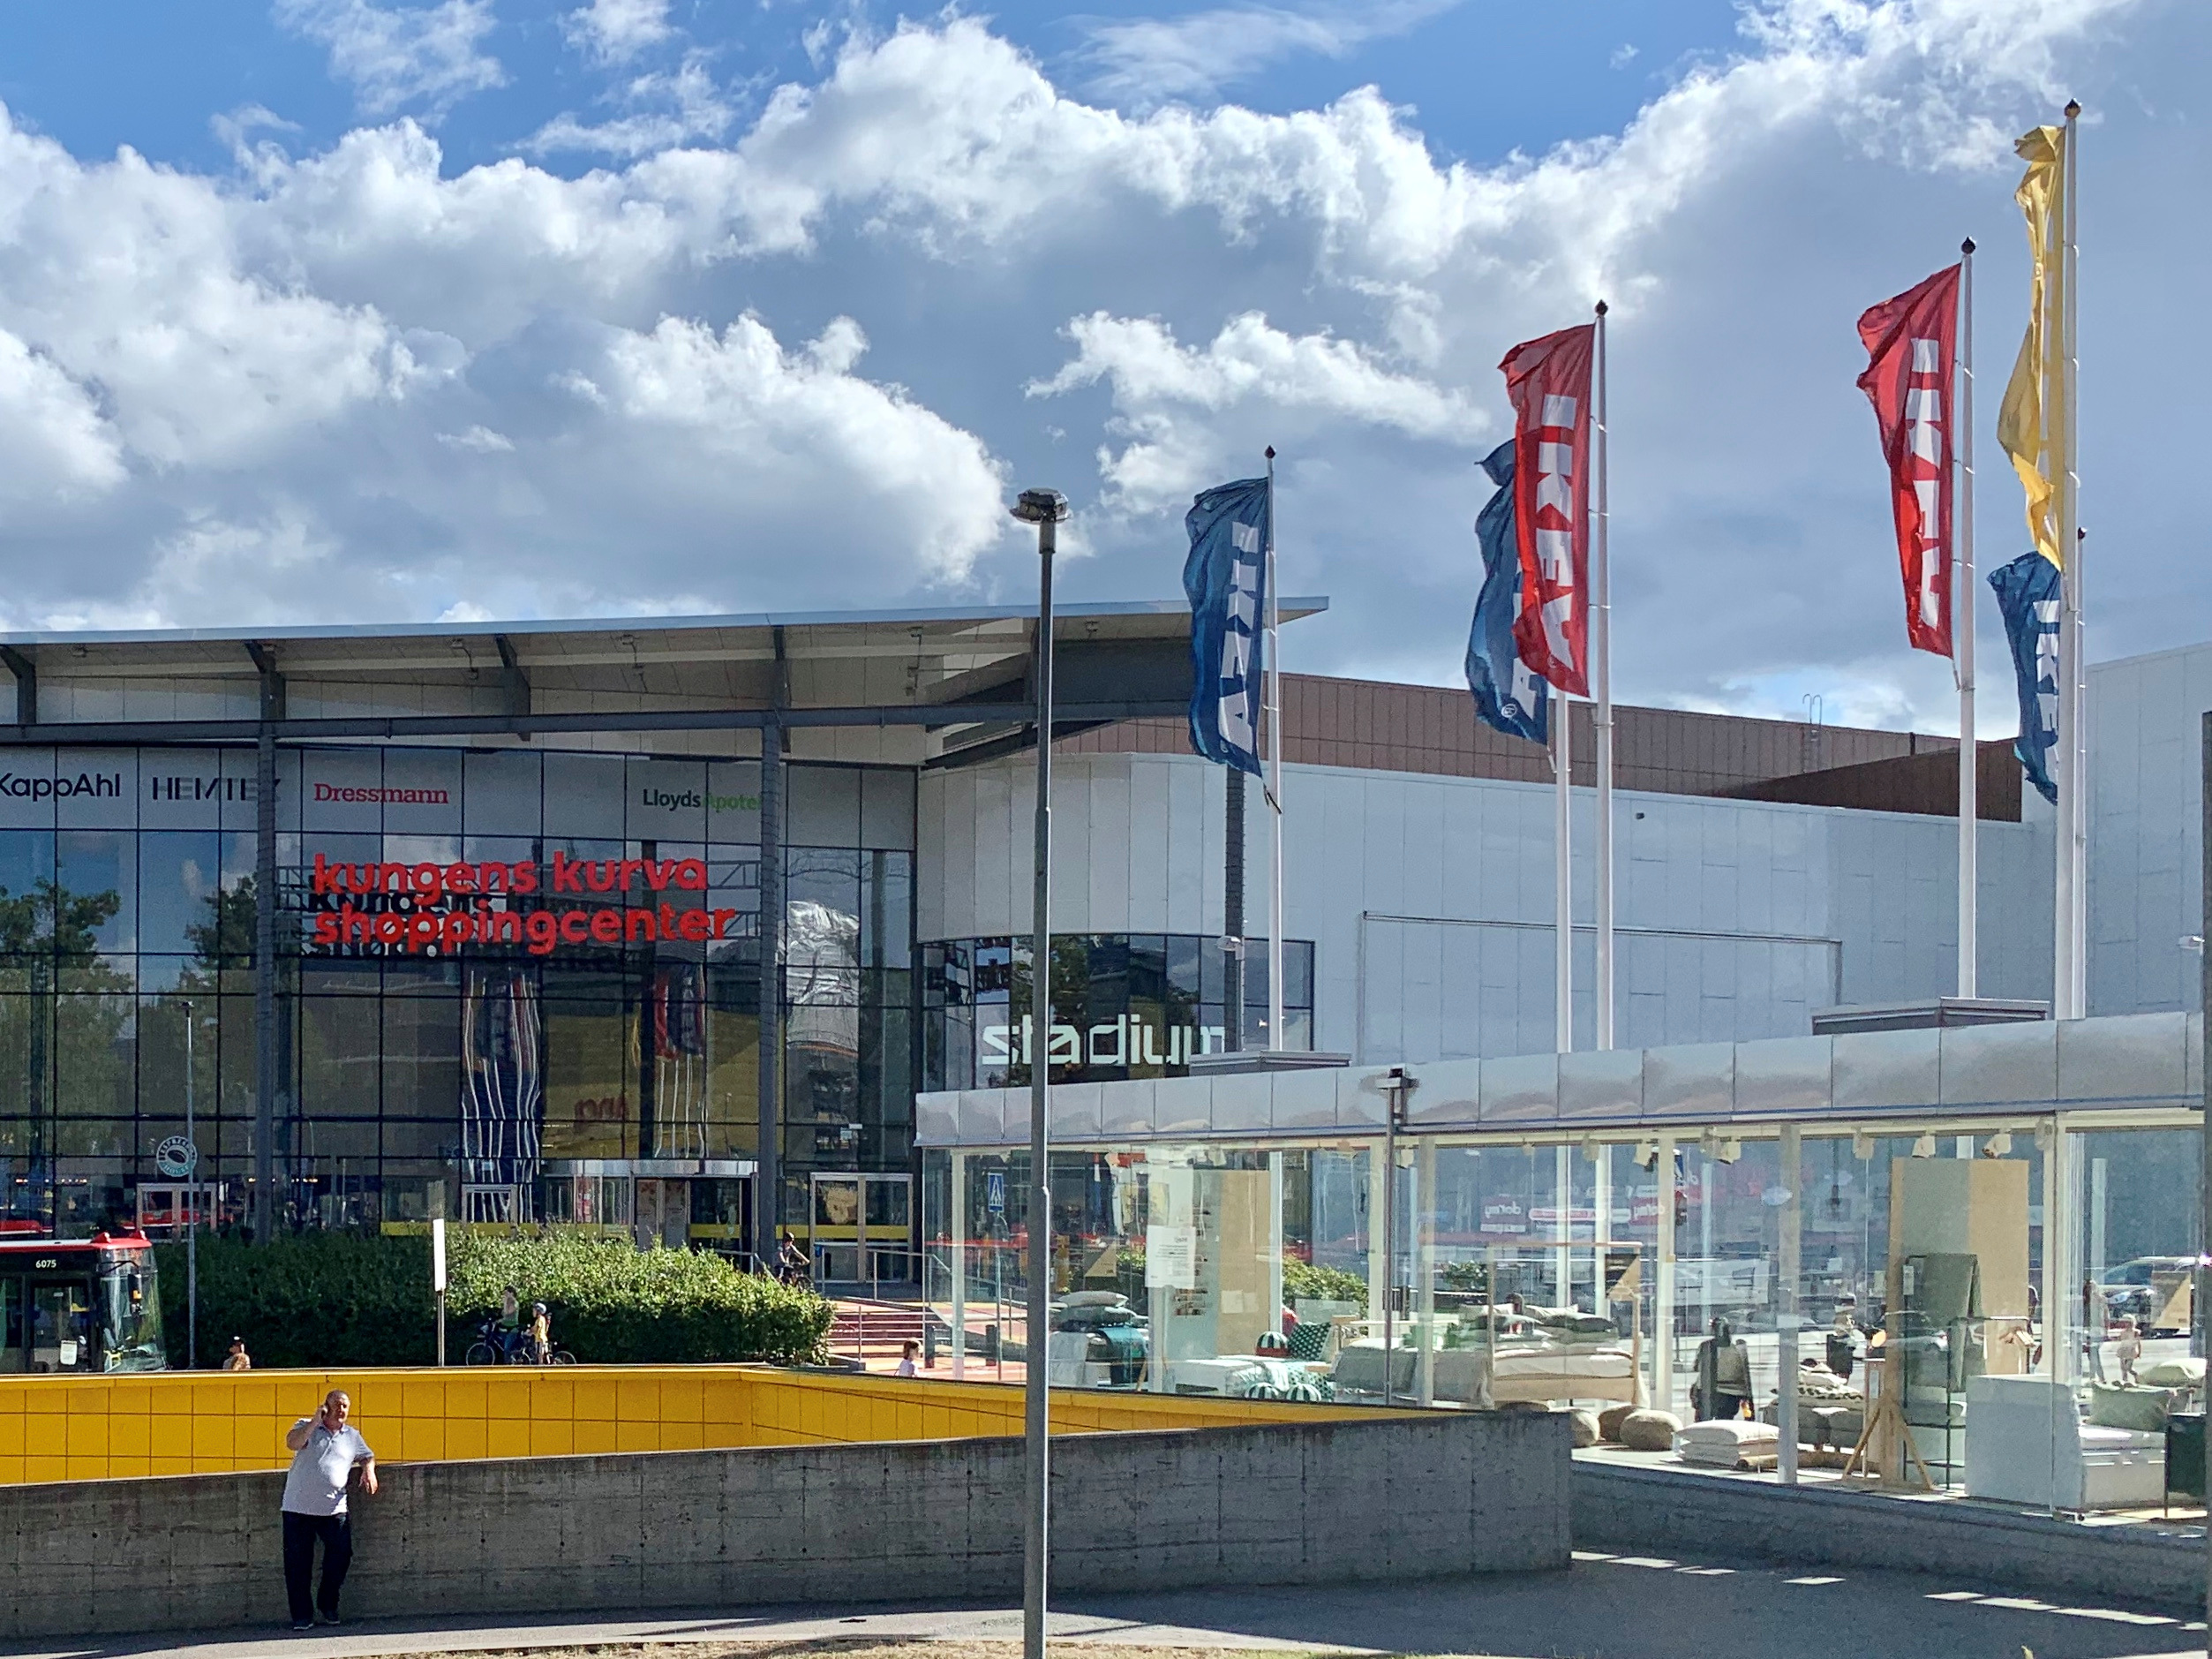 Furniture brand IKEA flags are seen next to a shopping mall owned by IKEA's malls arm Ingka Centres, on the outskirts of Stockholm